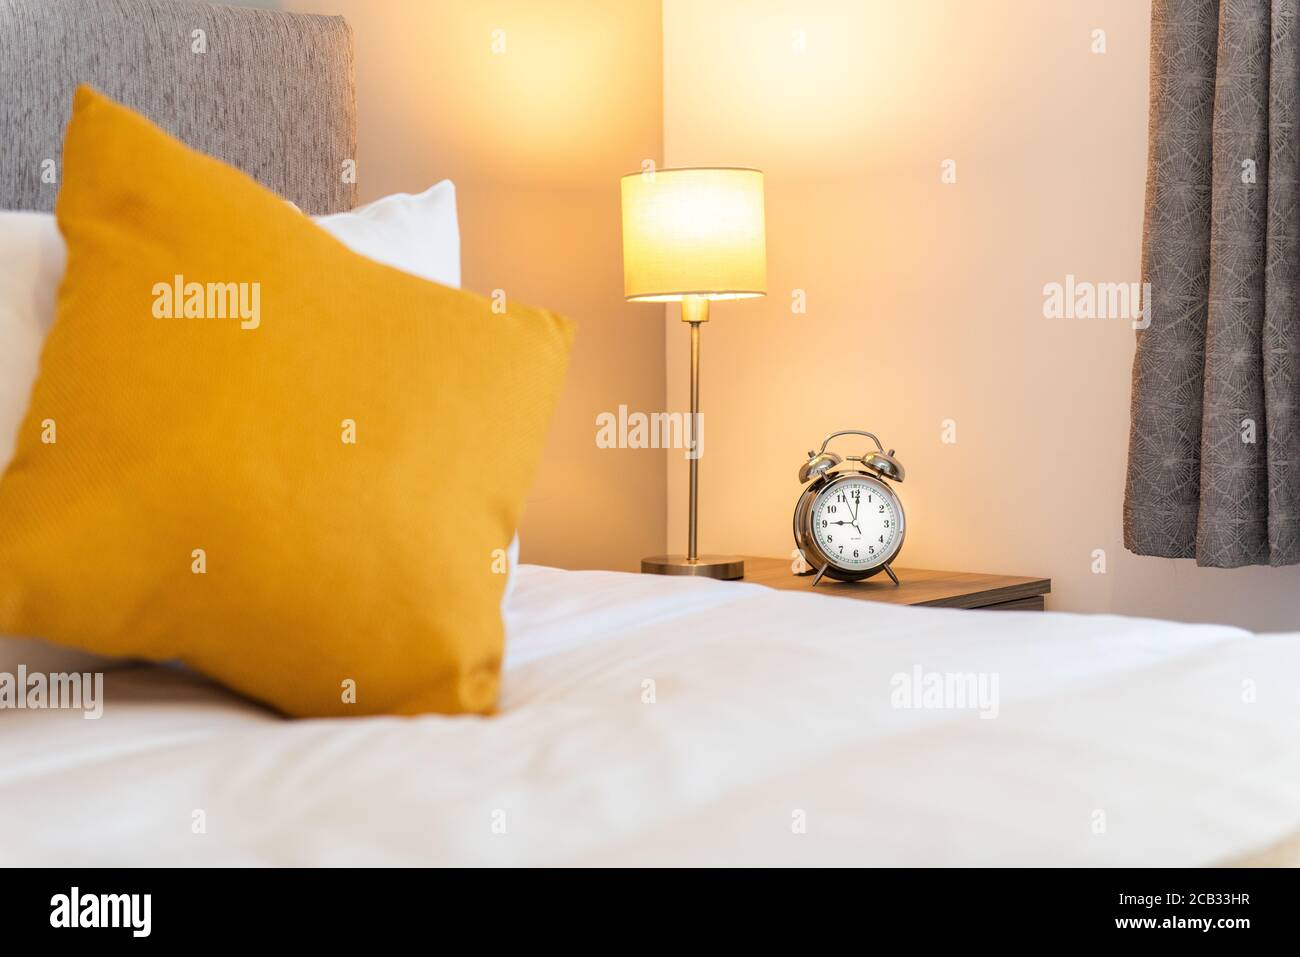 bedroom with yellow pillow and alarm clock Stock Photo